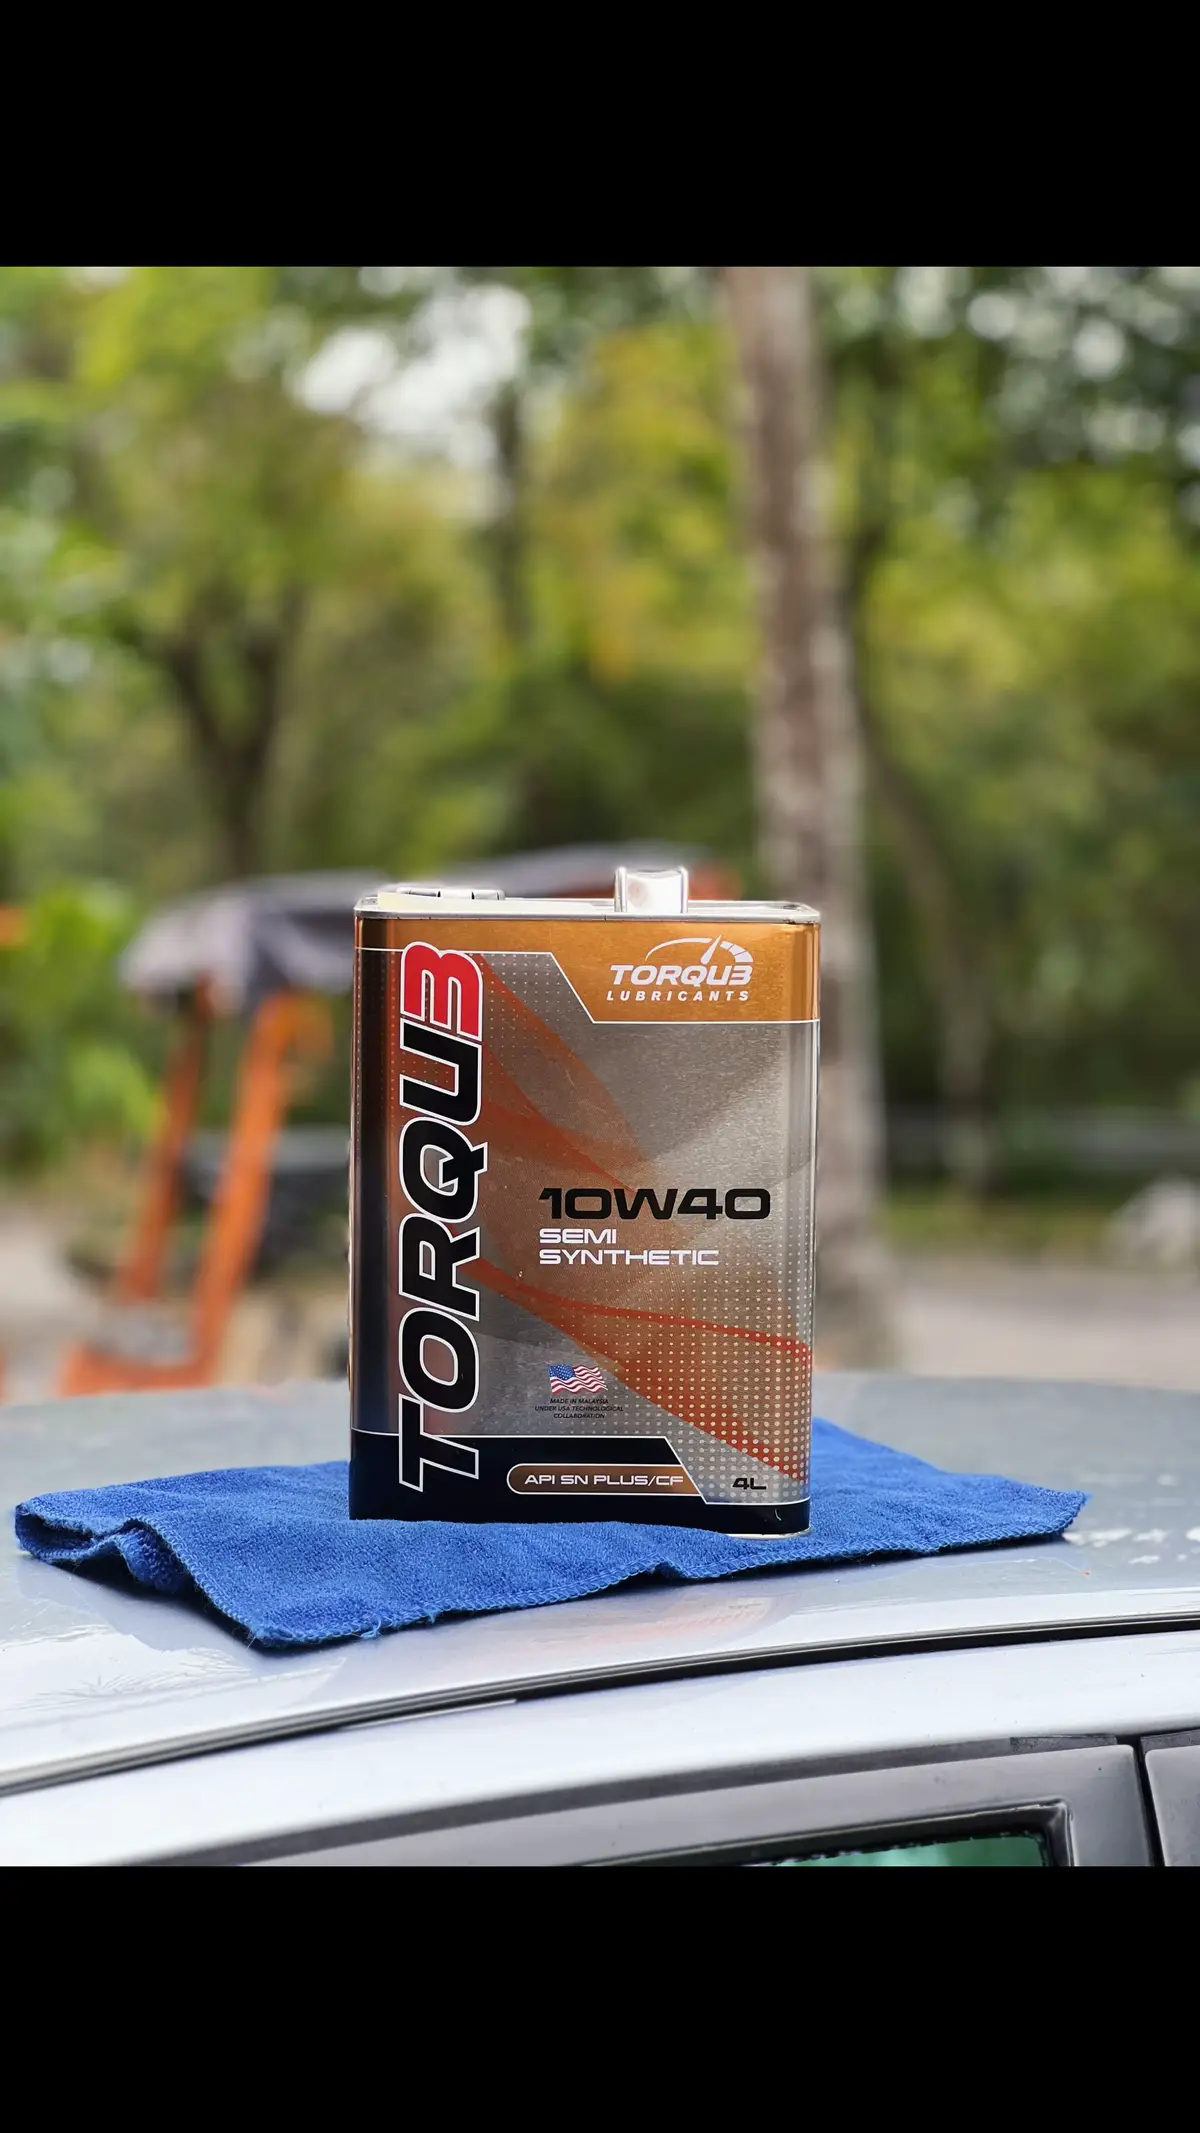 Protect your investment with the superior quality of Torqu3 Lubricants 10W40 semi-synthetic oil. Quality you can trust🛢️🔧 